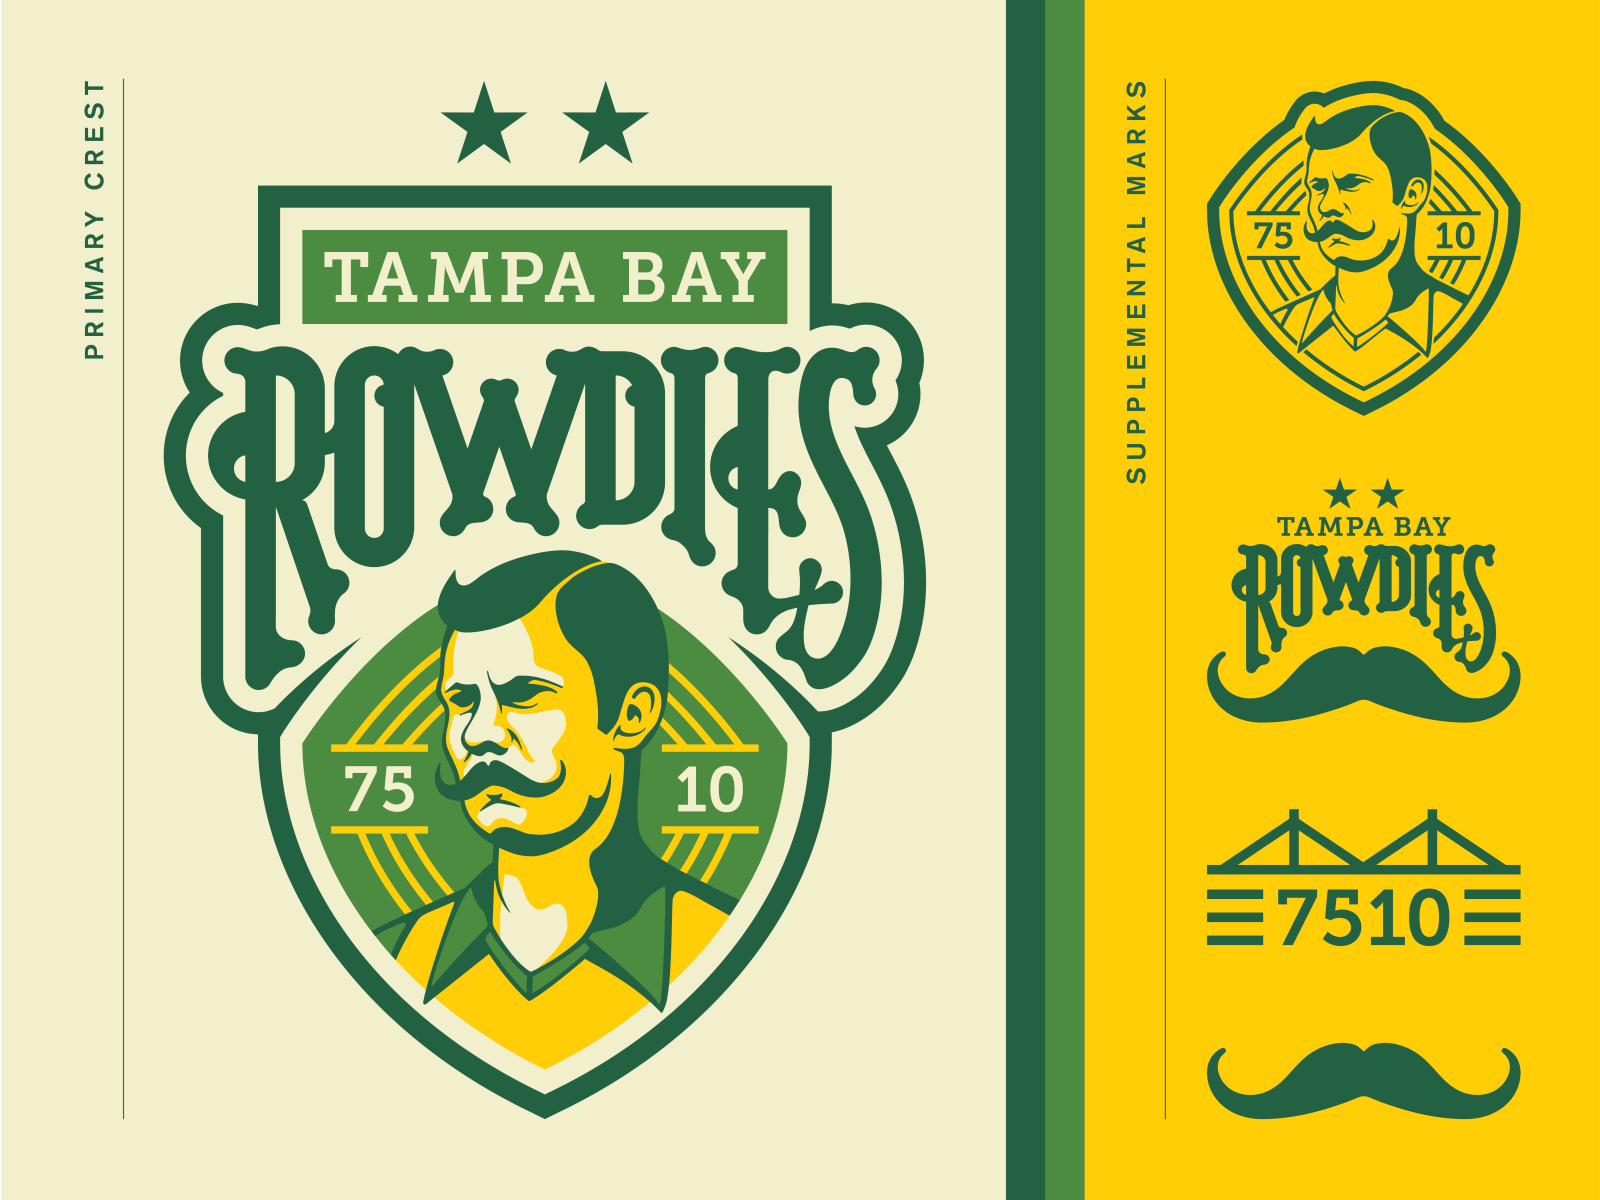 Tampa Bay Rowdies added a new photo. - Tampa Bay Rowdies